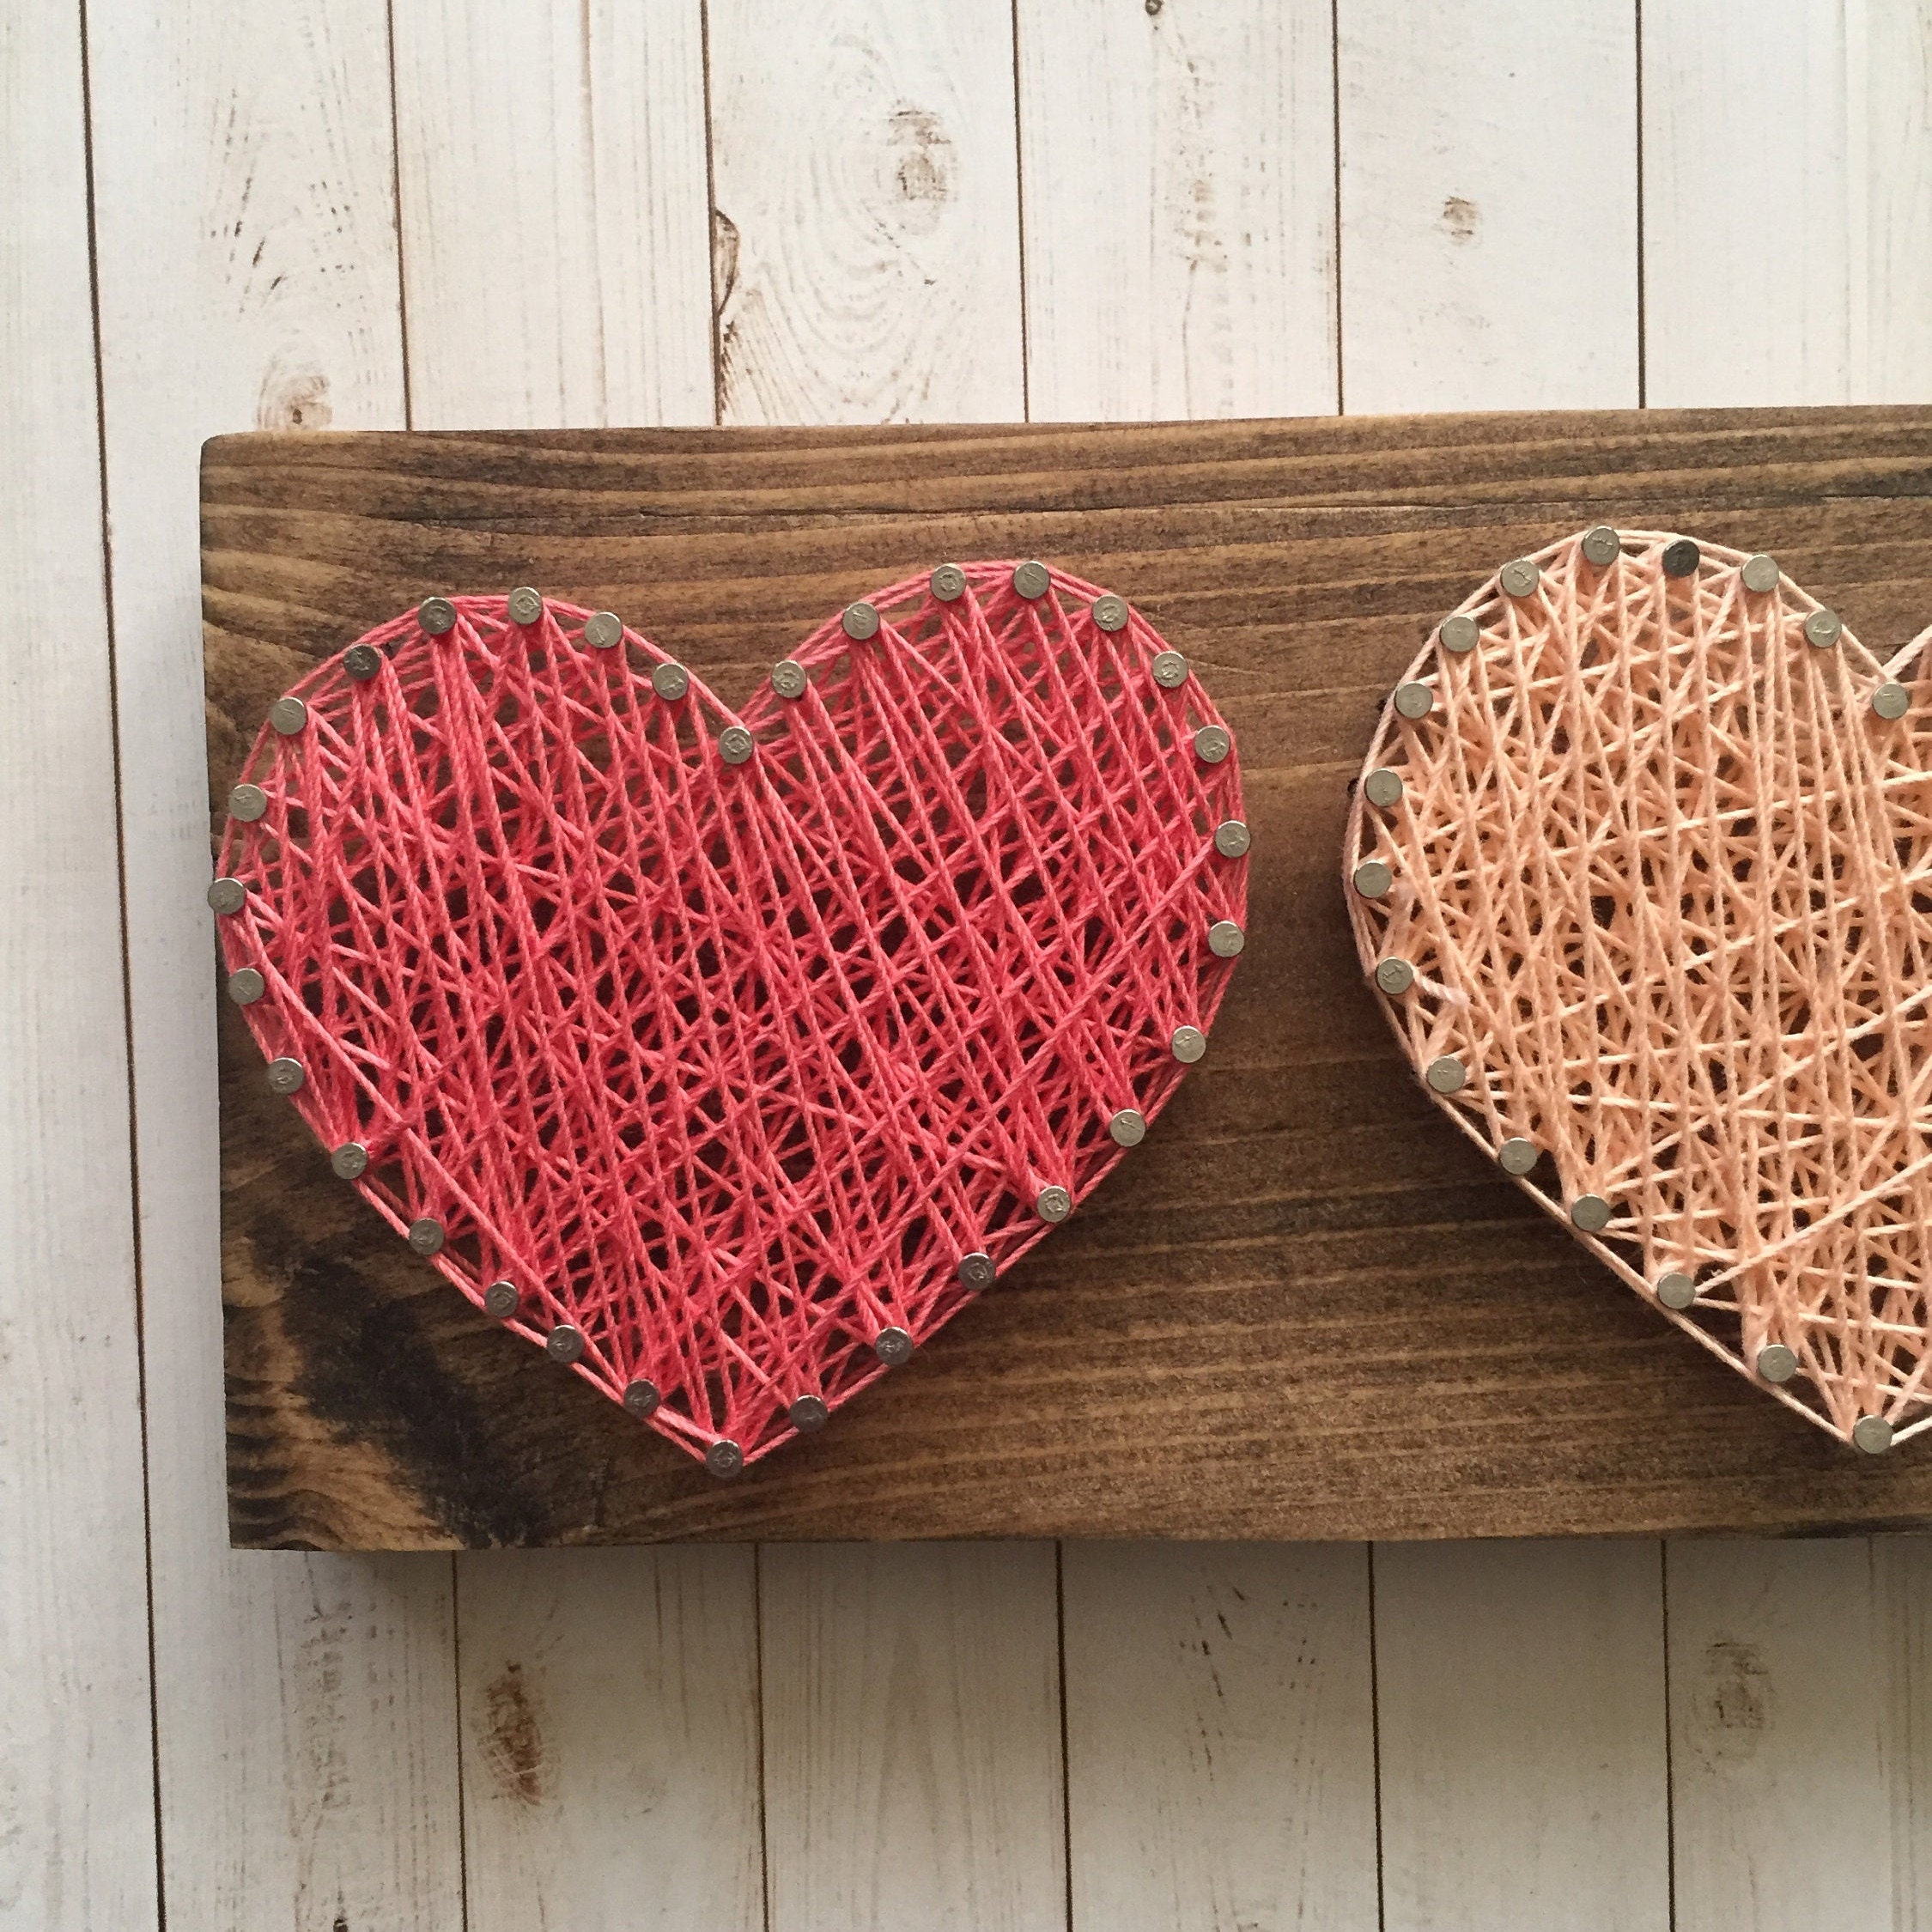 String Art Heart | Tutorial with PDF Template - YouTube